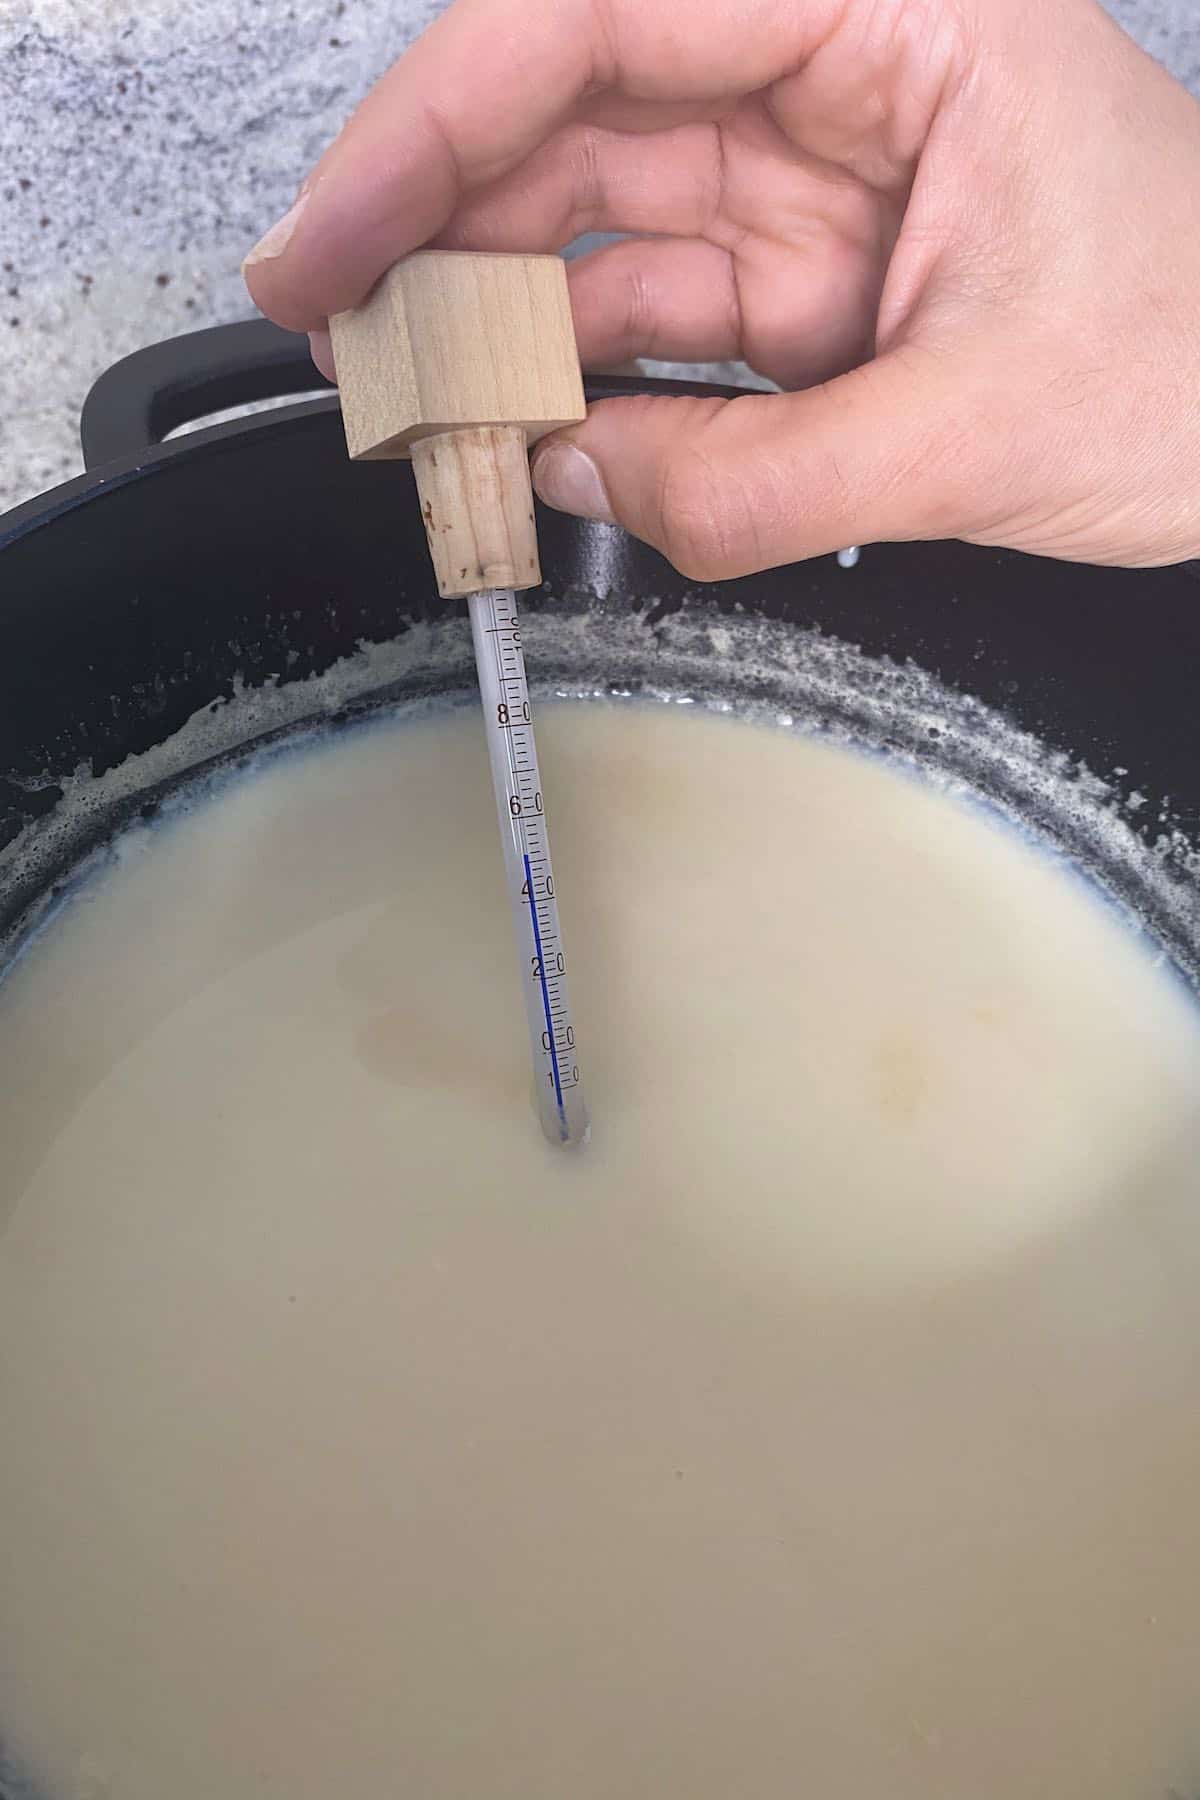 Measuring the temperature of hot soy milk